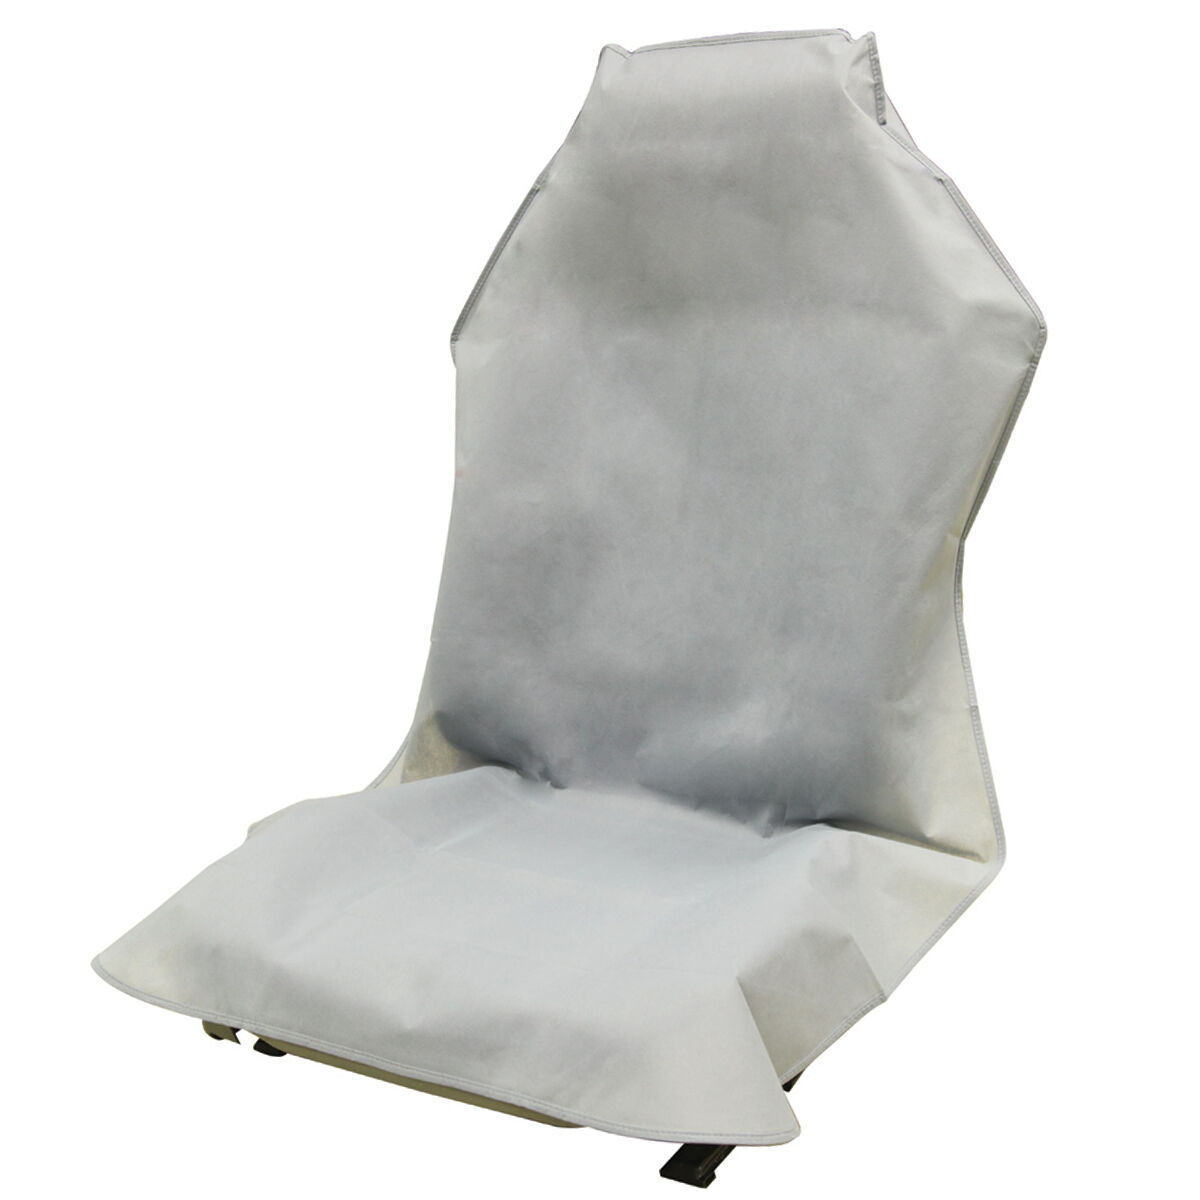 Case of 250 Automotive Interior Protection 10-004-250PK Seat-Mate Disposable Plastic Seat Cover, 